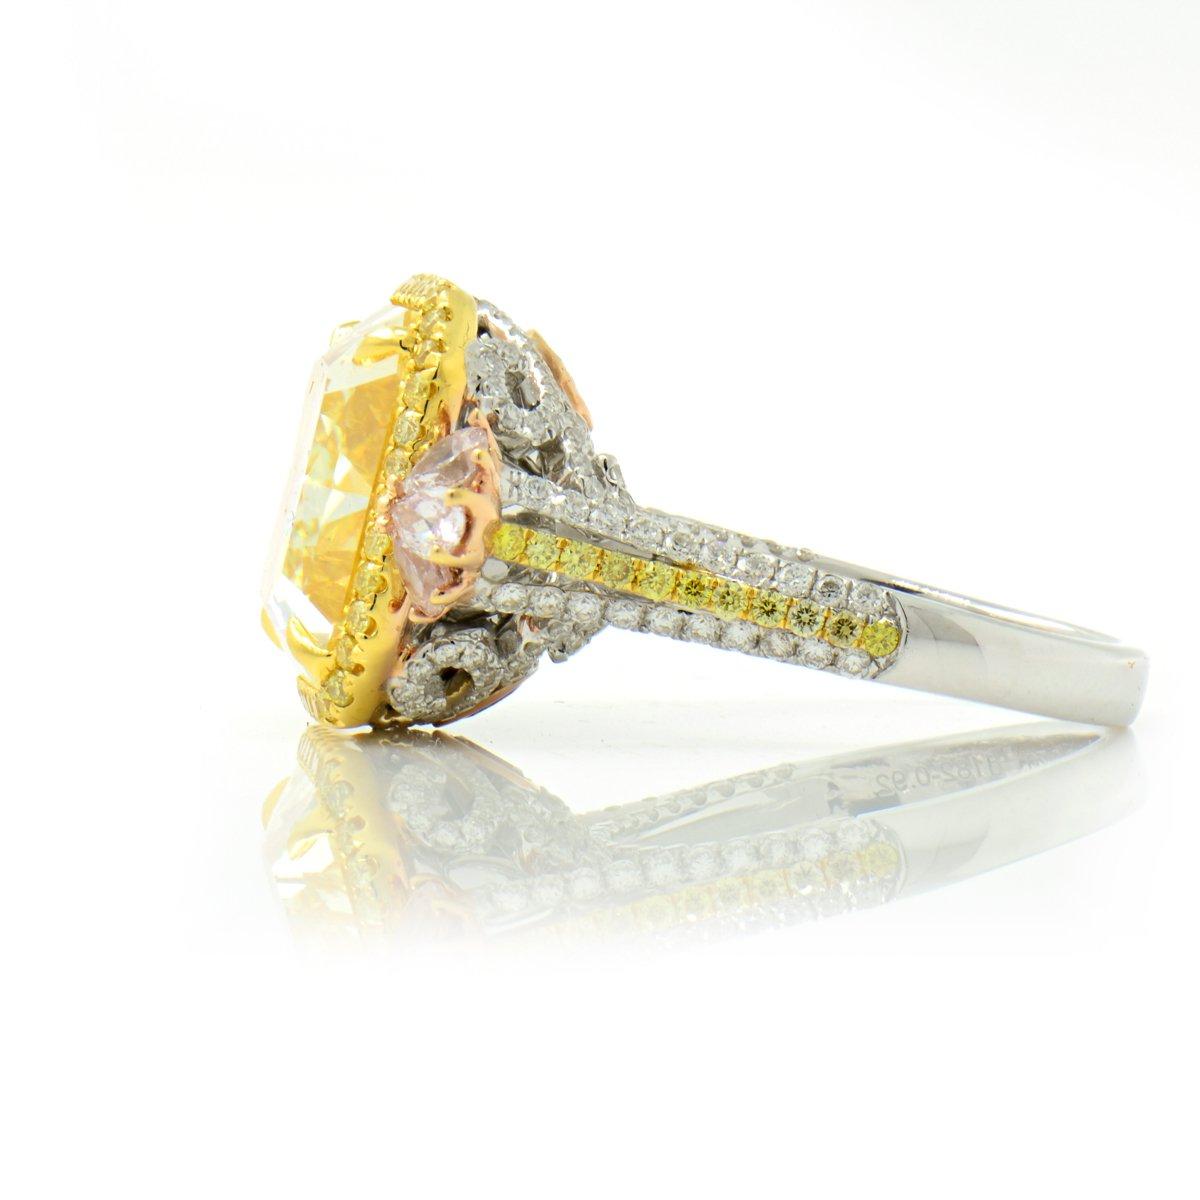 Radiant Cut GIA Certified Natural Untreated 14.14 Carat Yellow Pink White Diamond Ring For Sale